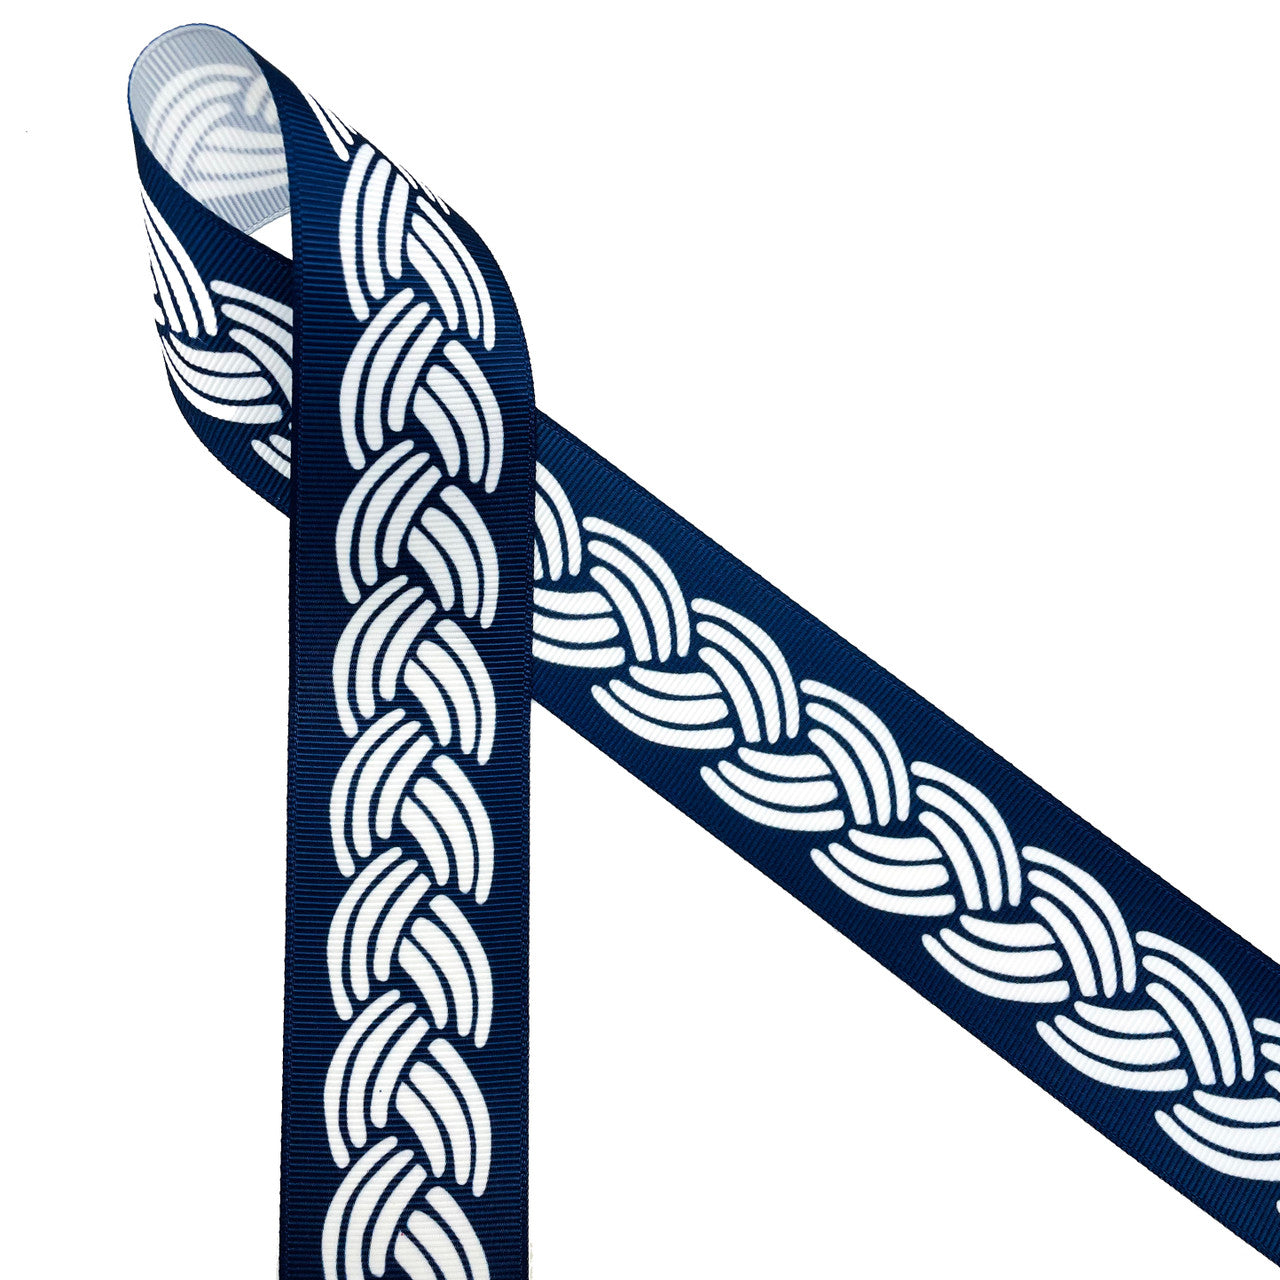 Nautical rope design on a navy blue background printed on 1.5 white  grosgrain ribbon, 10 yards